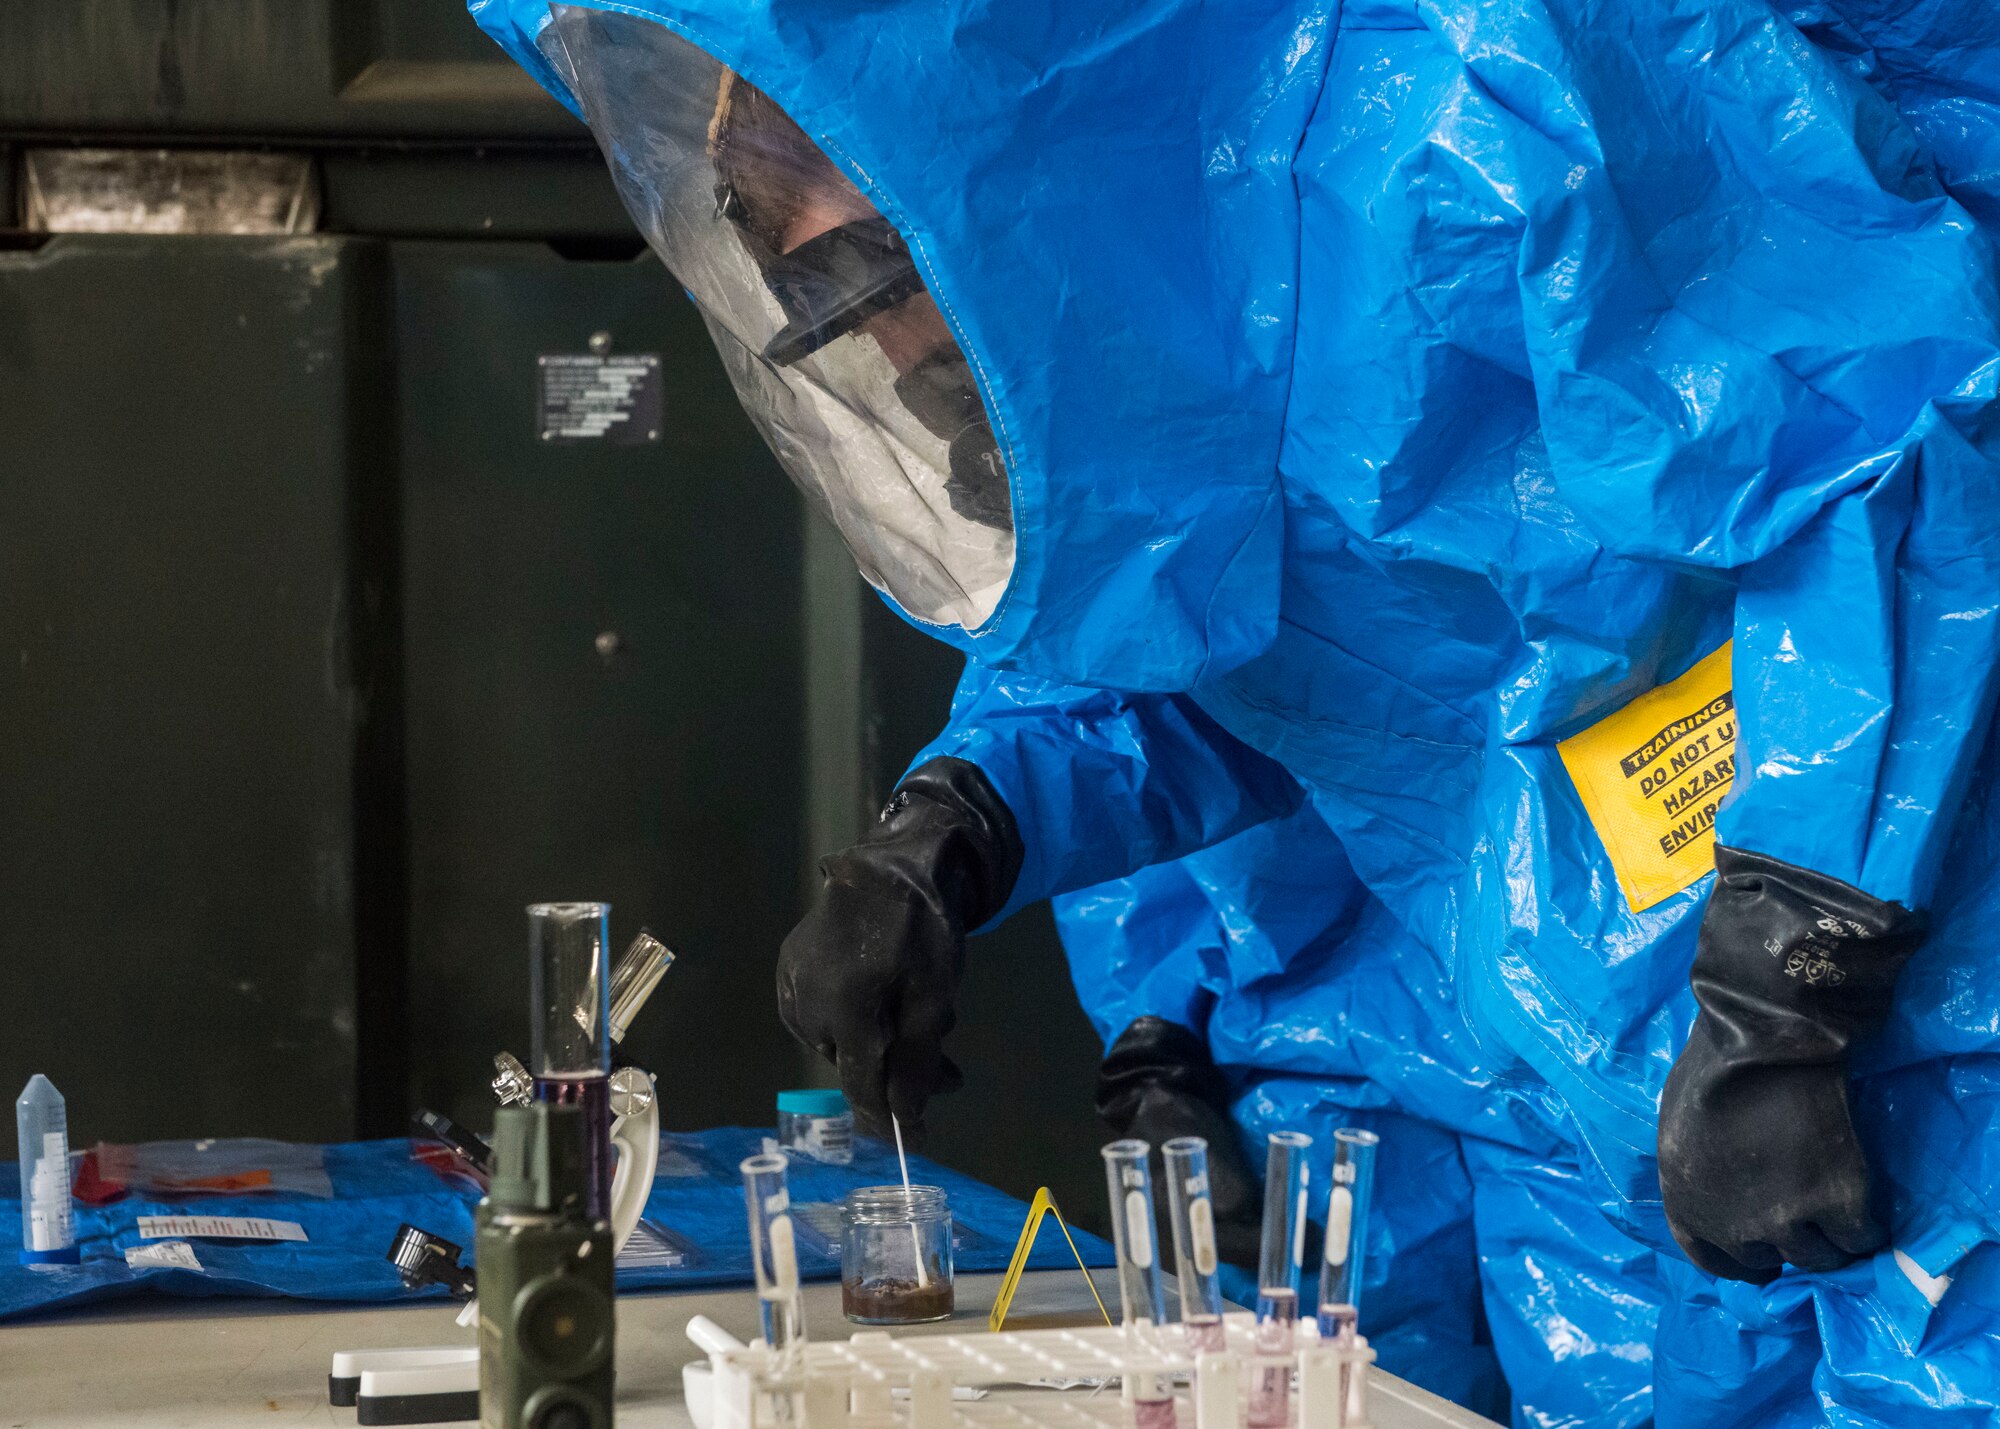 Man in hazmat suit collects and studies unknown samples on a table